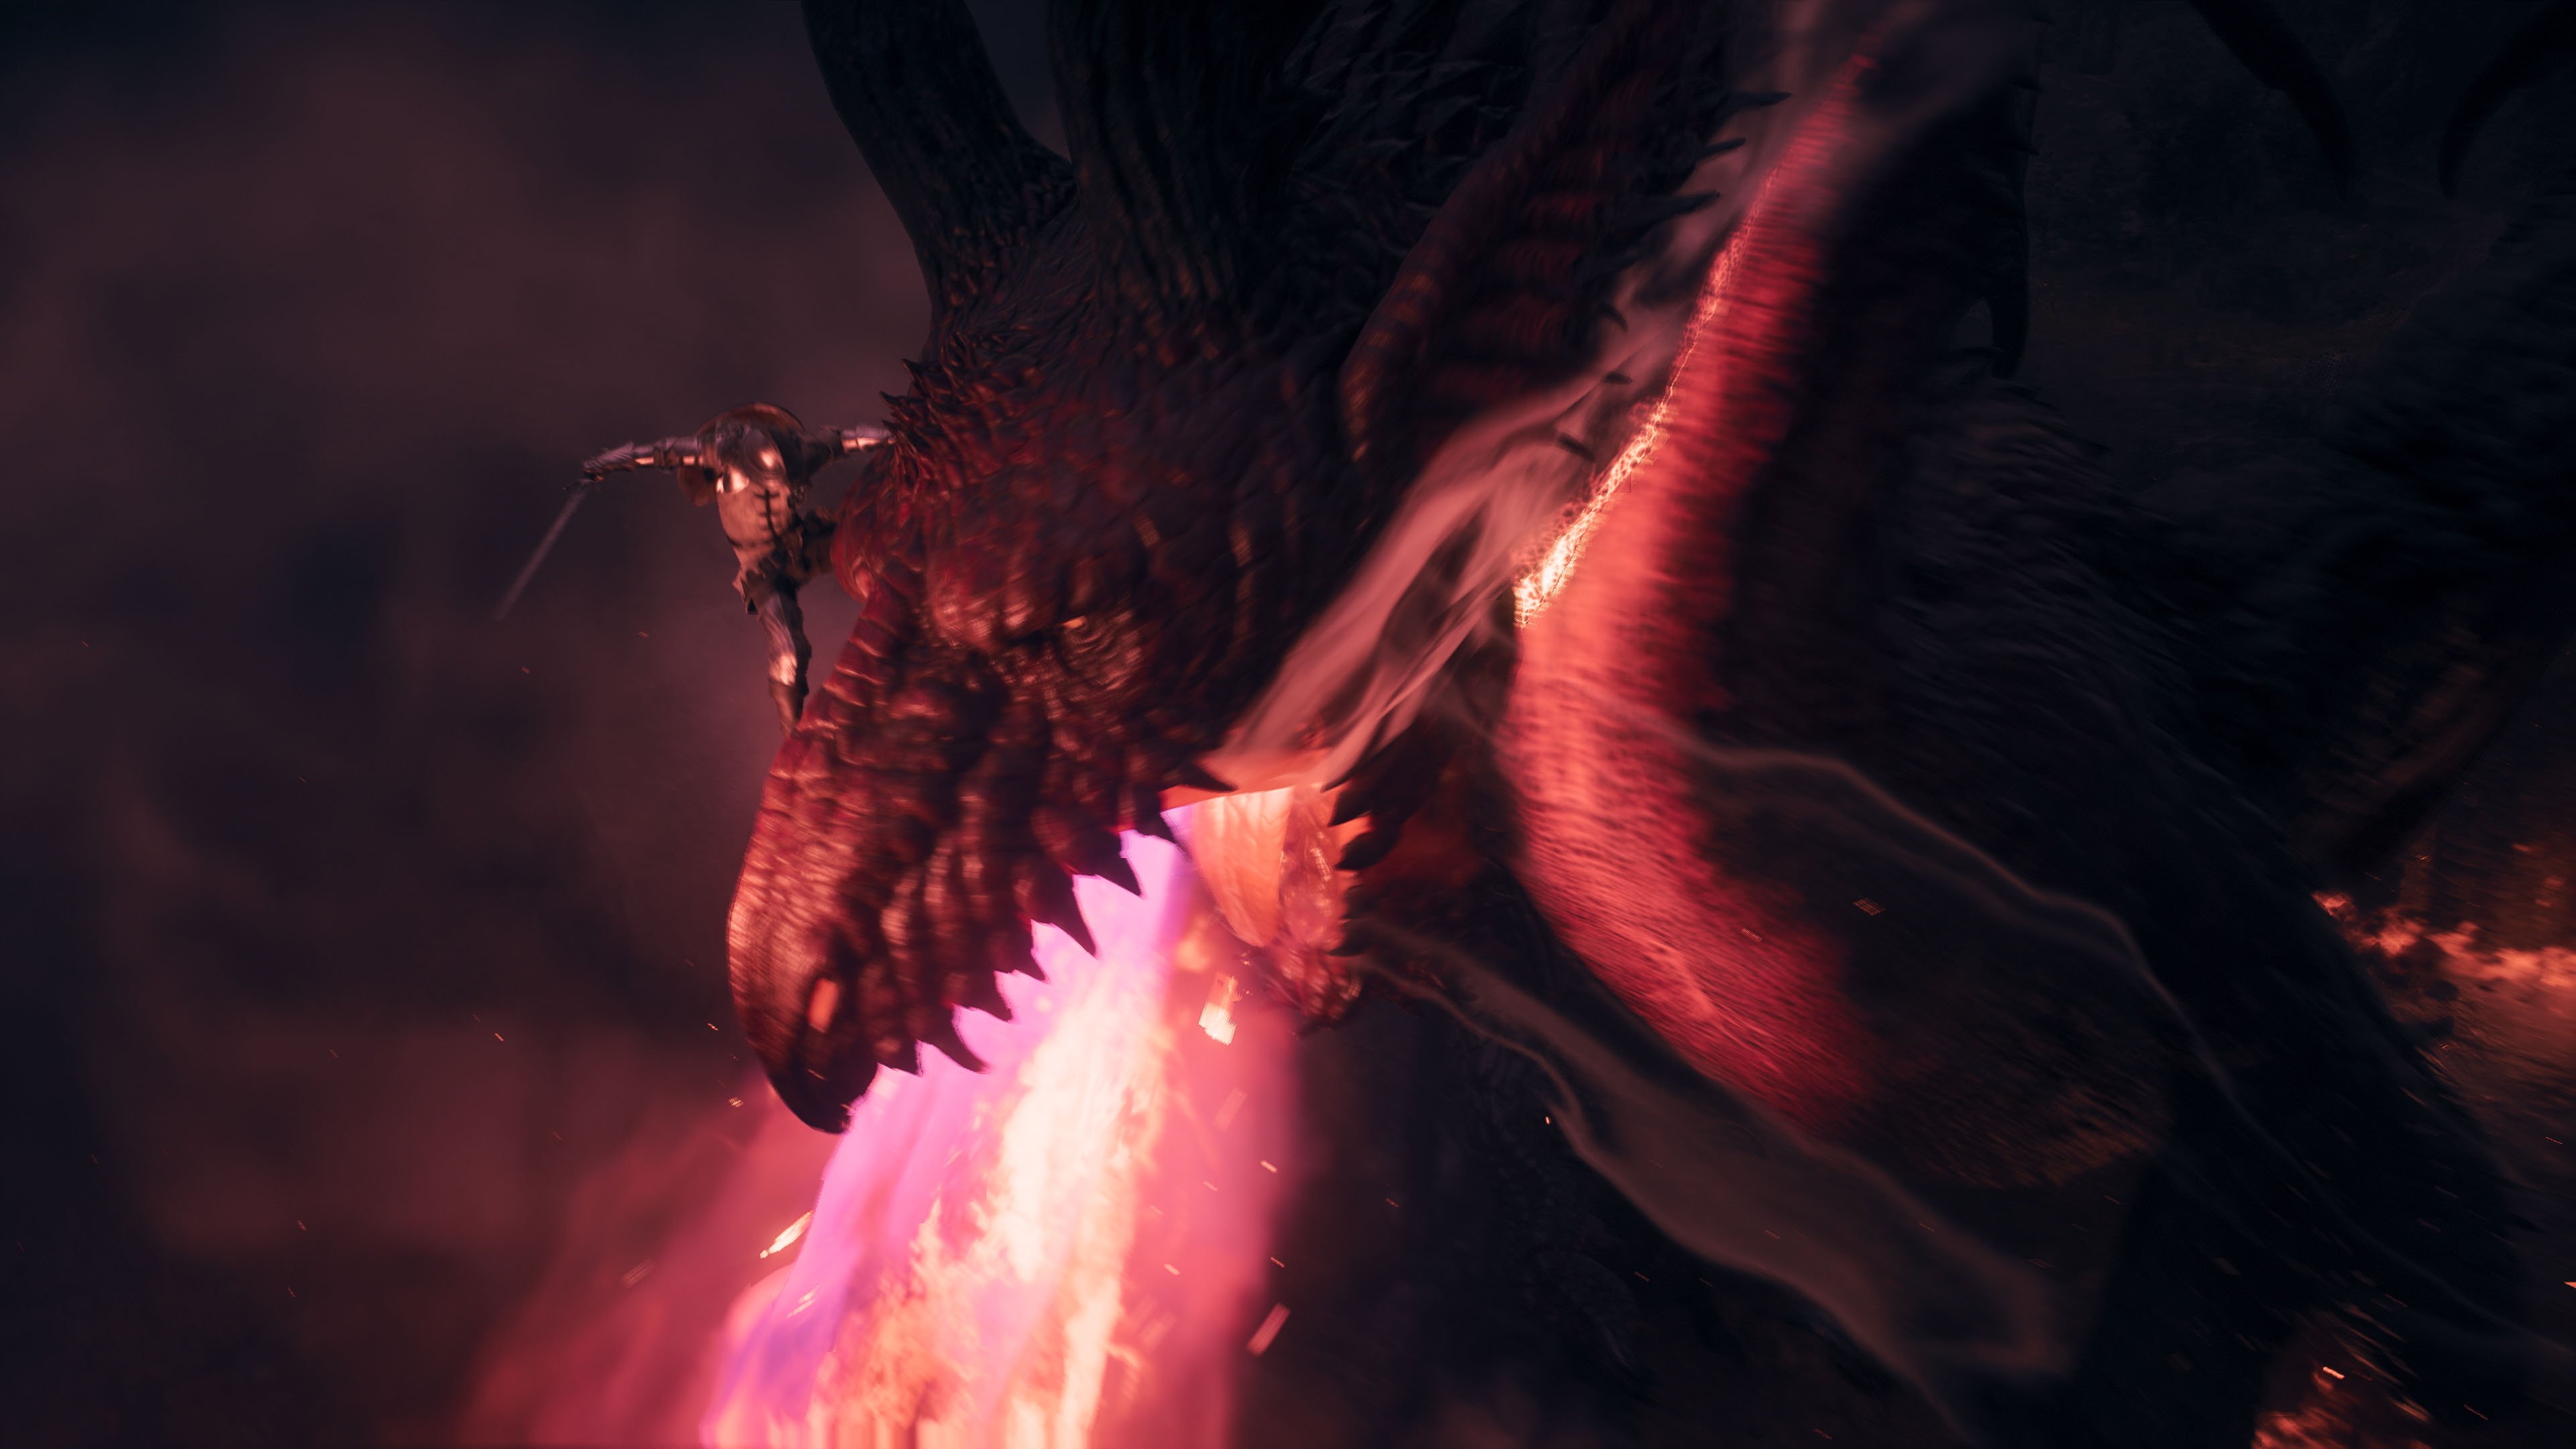 Dragon's Dogma 2: Things The Sequel Should Not Change From The Original